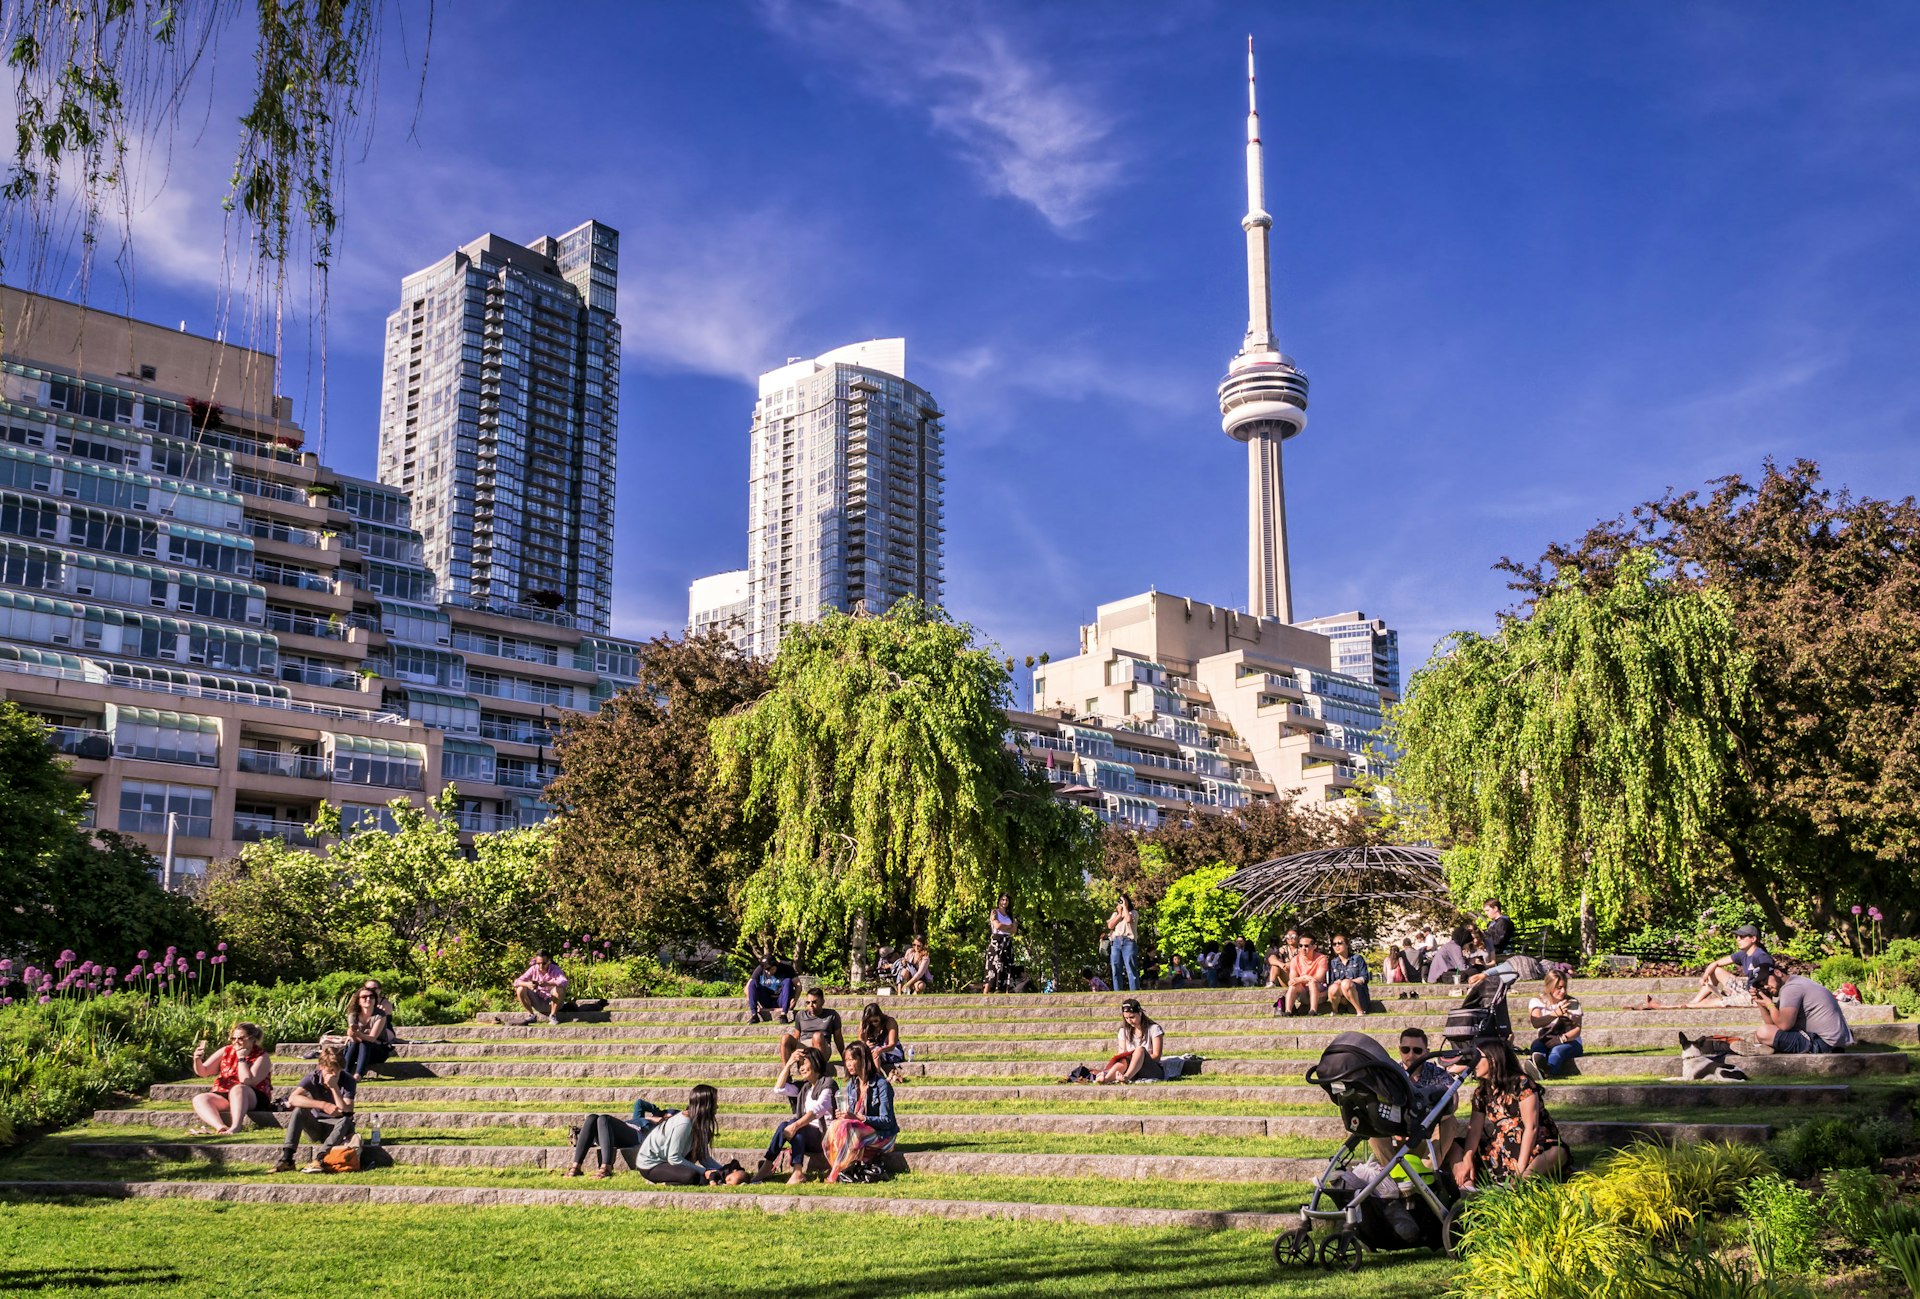 Toronto Music Garden is one of the city's loveliest locations